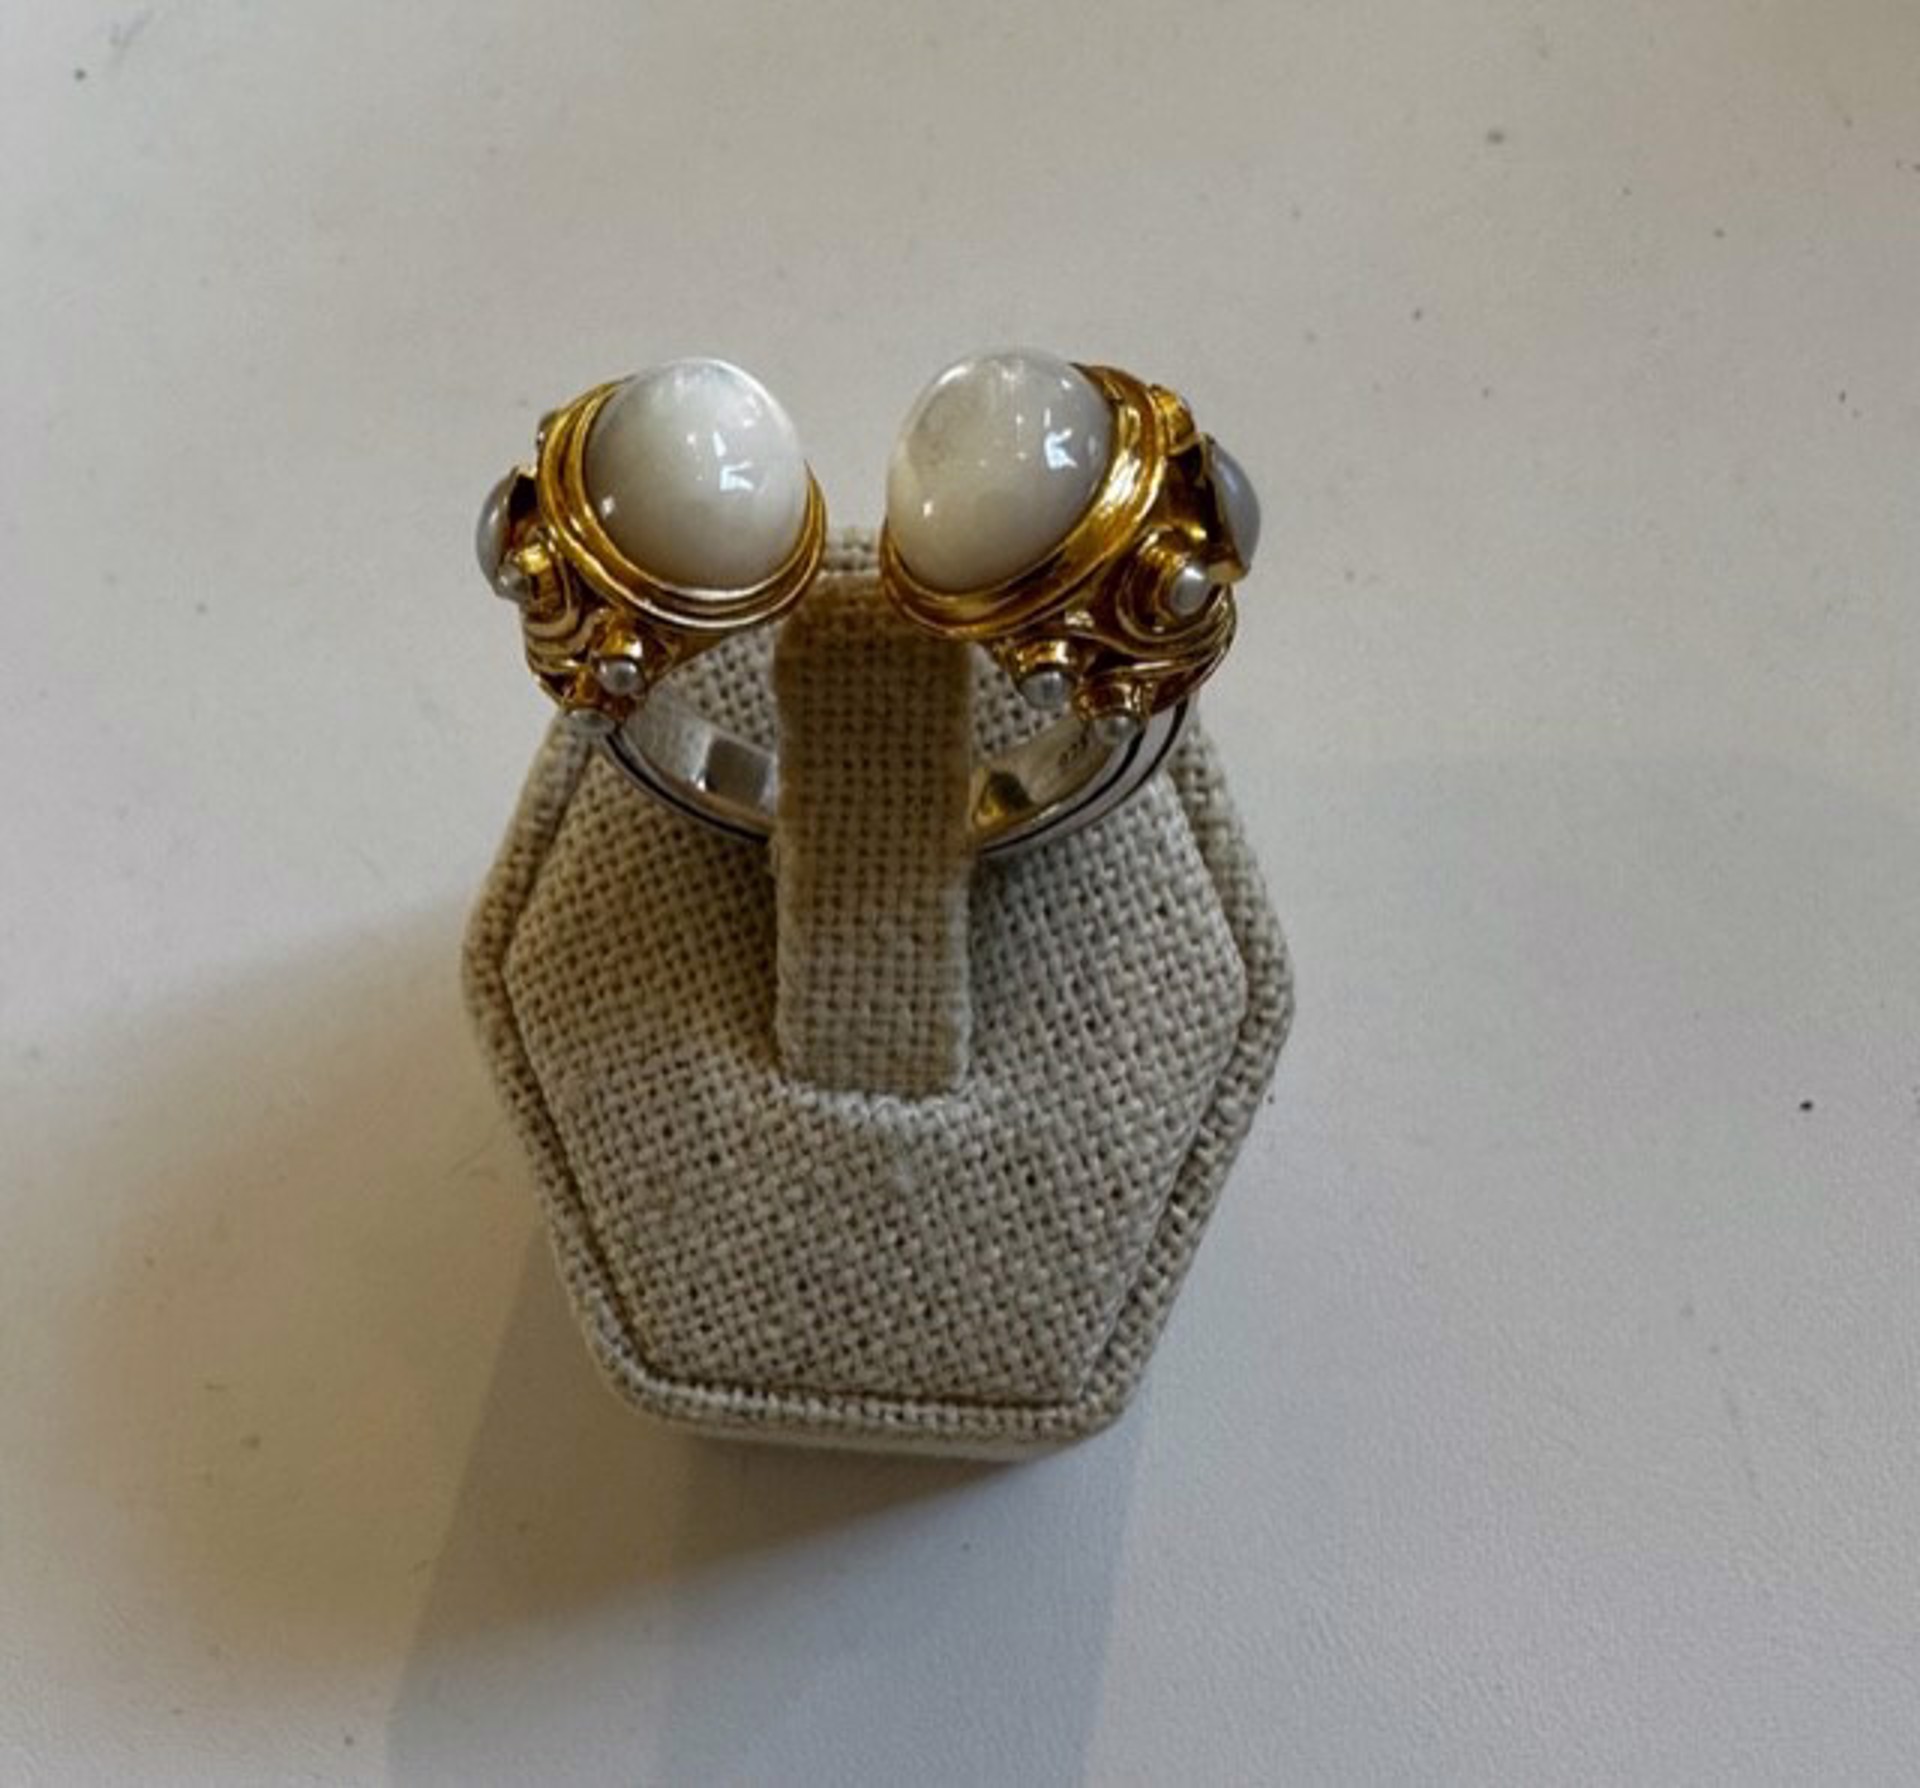 Moonstone/Pearl Cuff Style by J. Catma